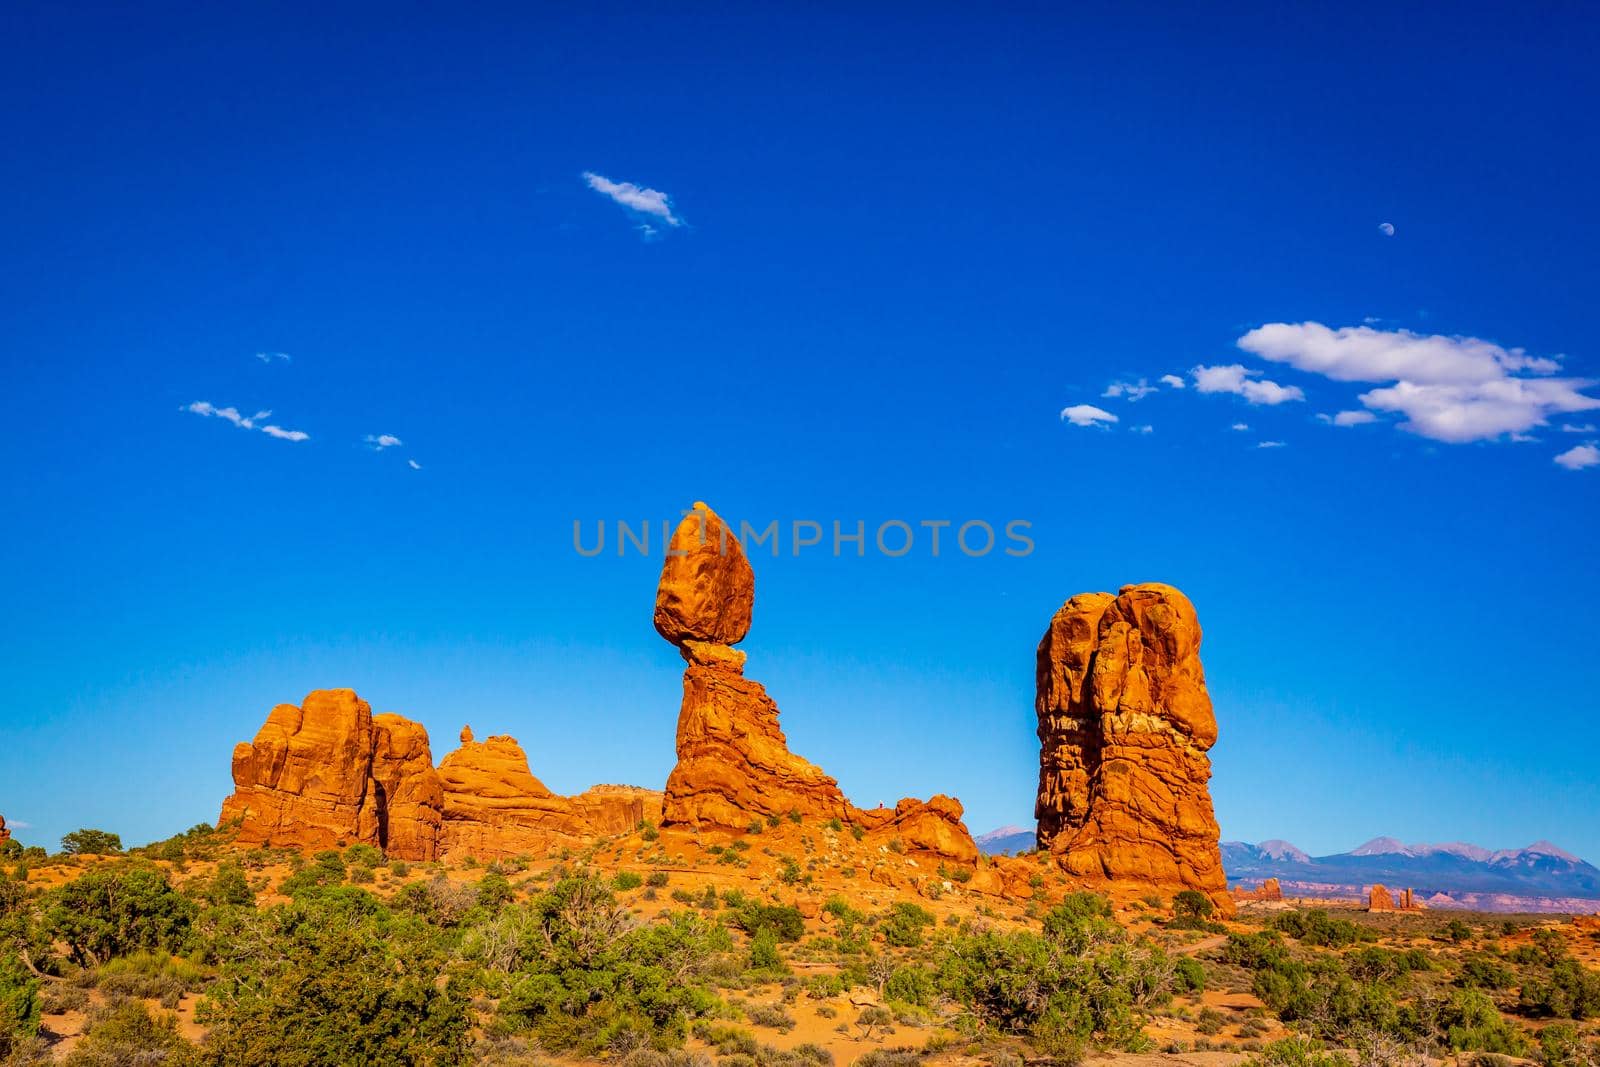 Balanced Rock and nearby rock formations in Arches National Park, Utah